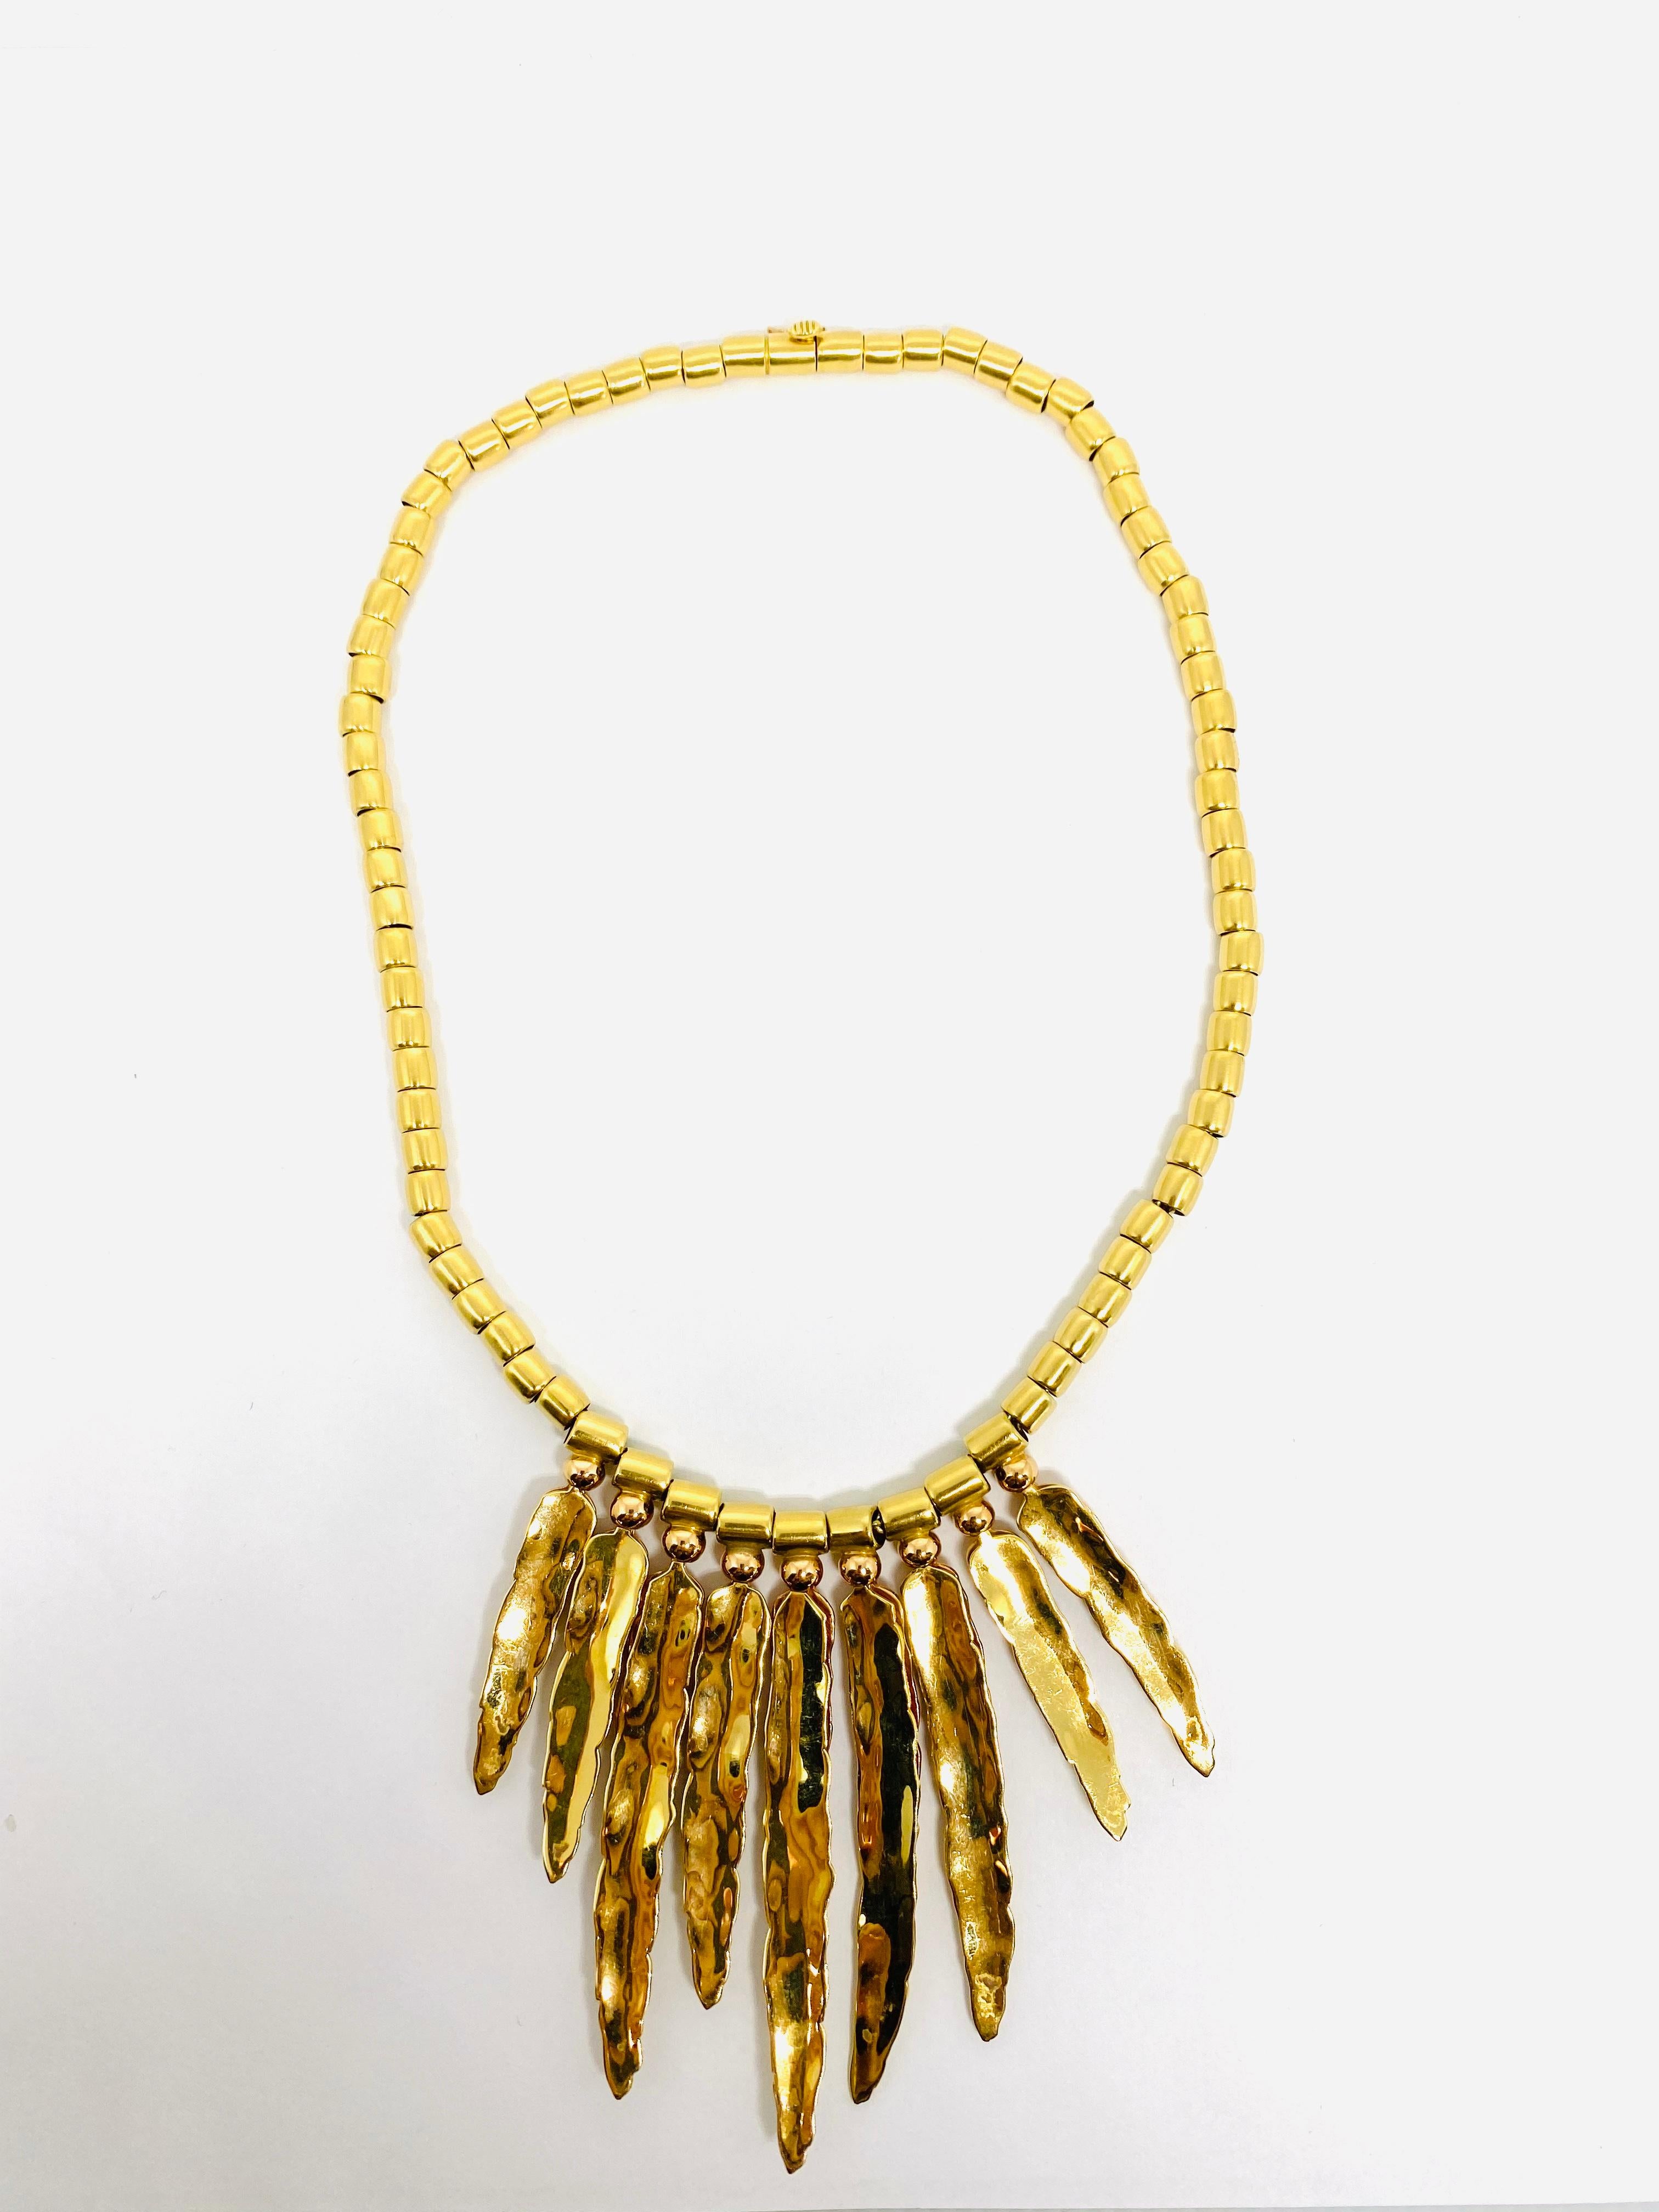 Vintage H. Stern 18K Yellow Gold Bead Necklace w/ Feather Leaves Pendant  1